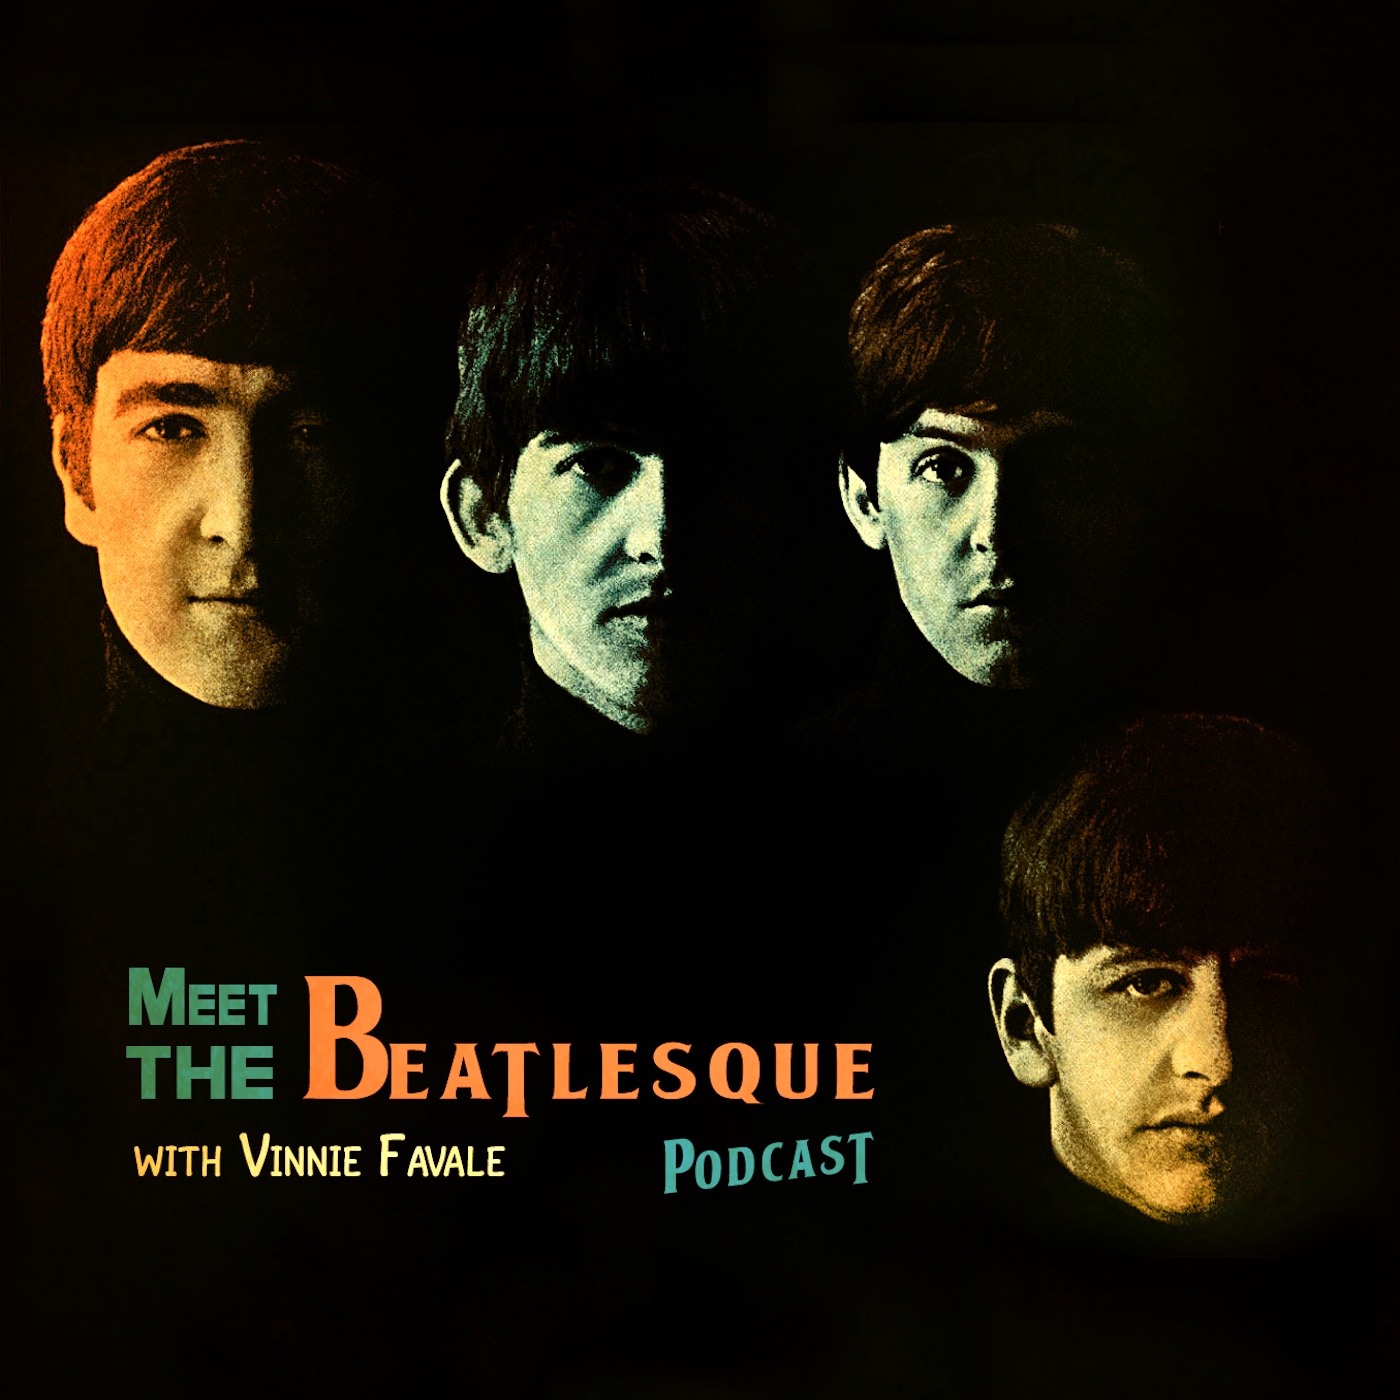 Meet The Beatlesque with Vinnie Favale - Show #5